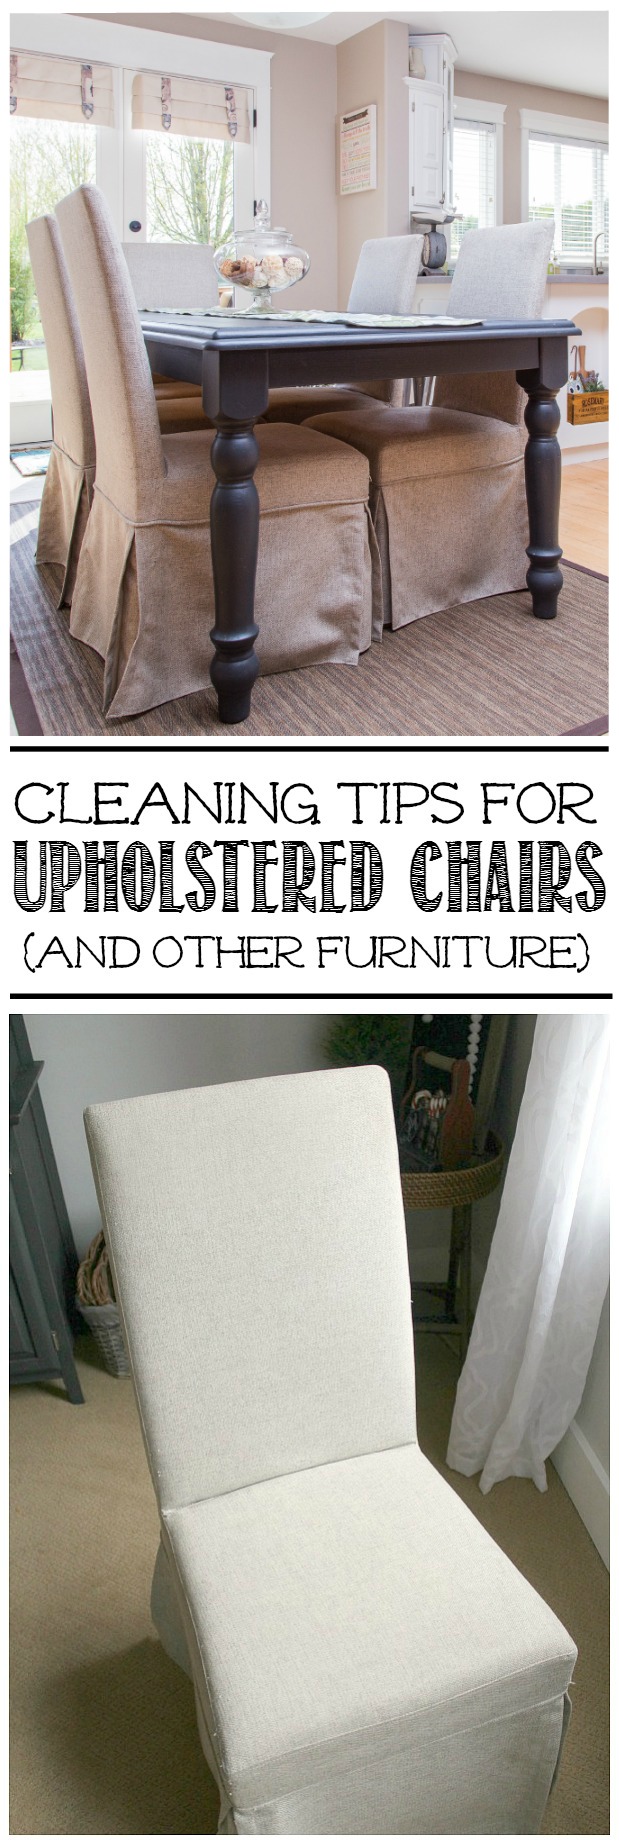 How To Clean Upholstered Chairs, How To Clean Fabric On Dining Room Chairs